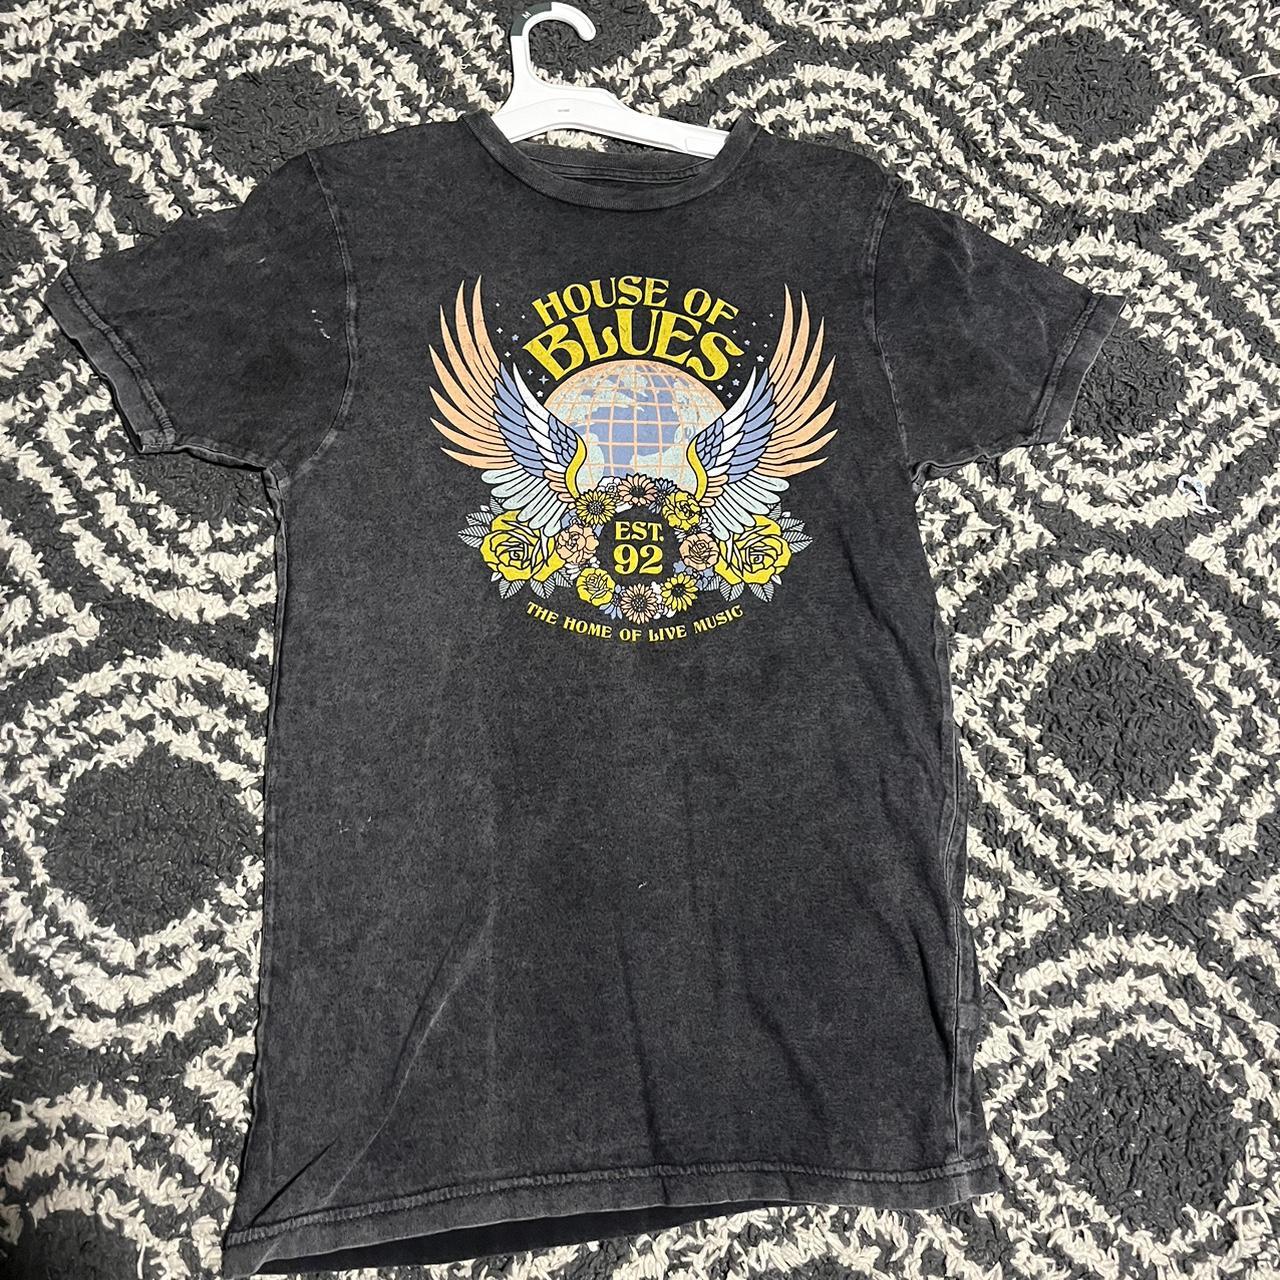 House of blues, barely worn T-shirt home of live music - Depop